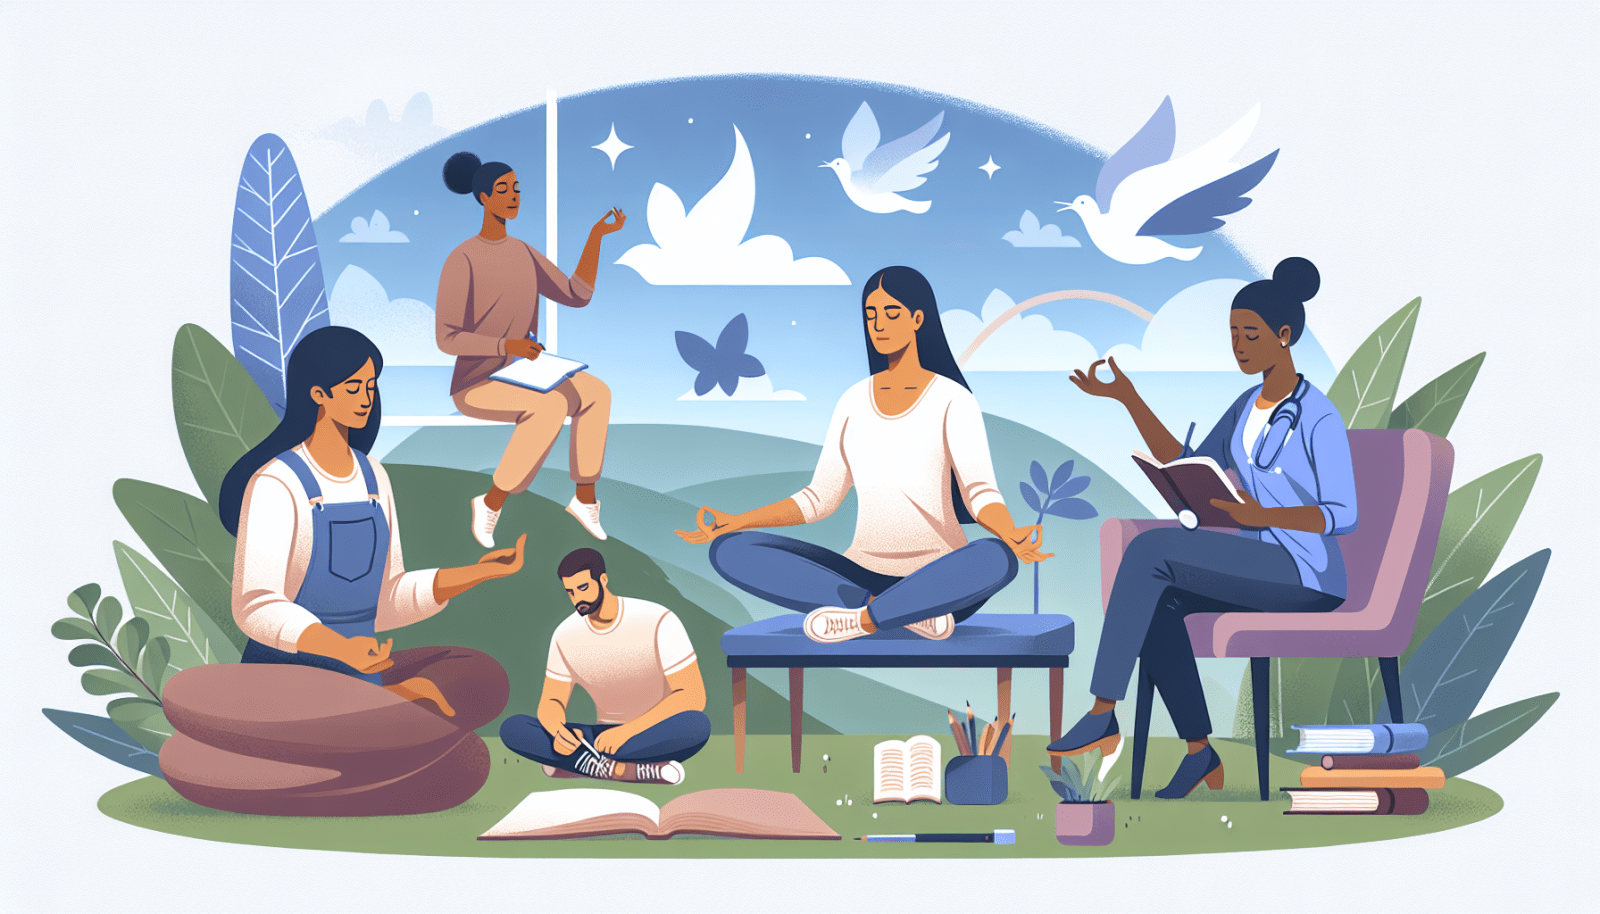 Illustration of a diverse group of five people engaging in creative and relaxing activities such as meditation, reading, writing, and drawing, surrounded by an idyllic landscape with birds, plants, and a calm sky transitioning from day to night.